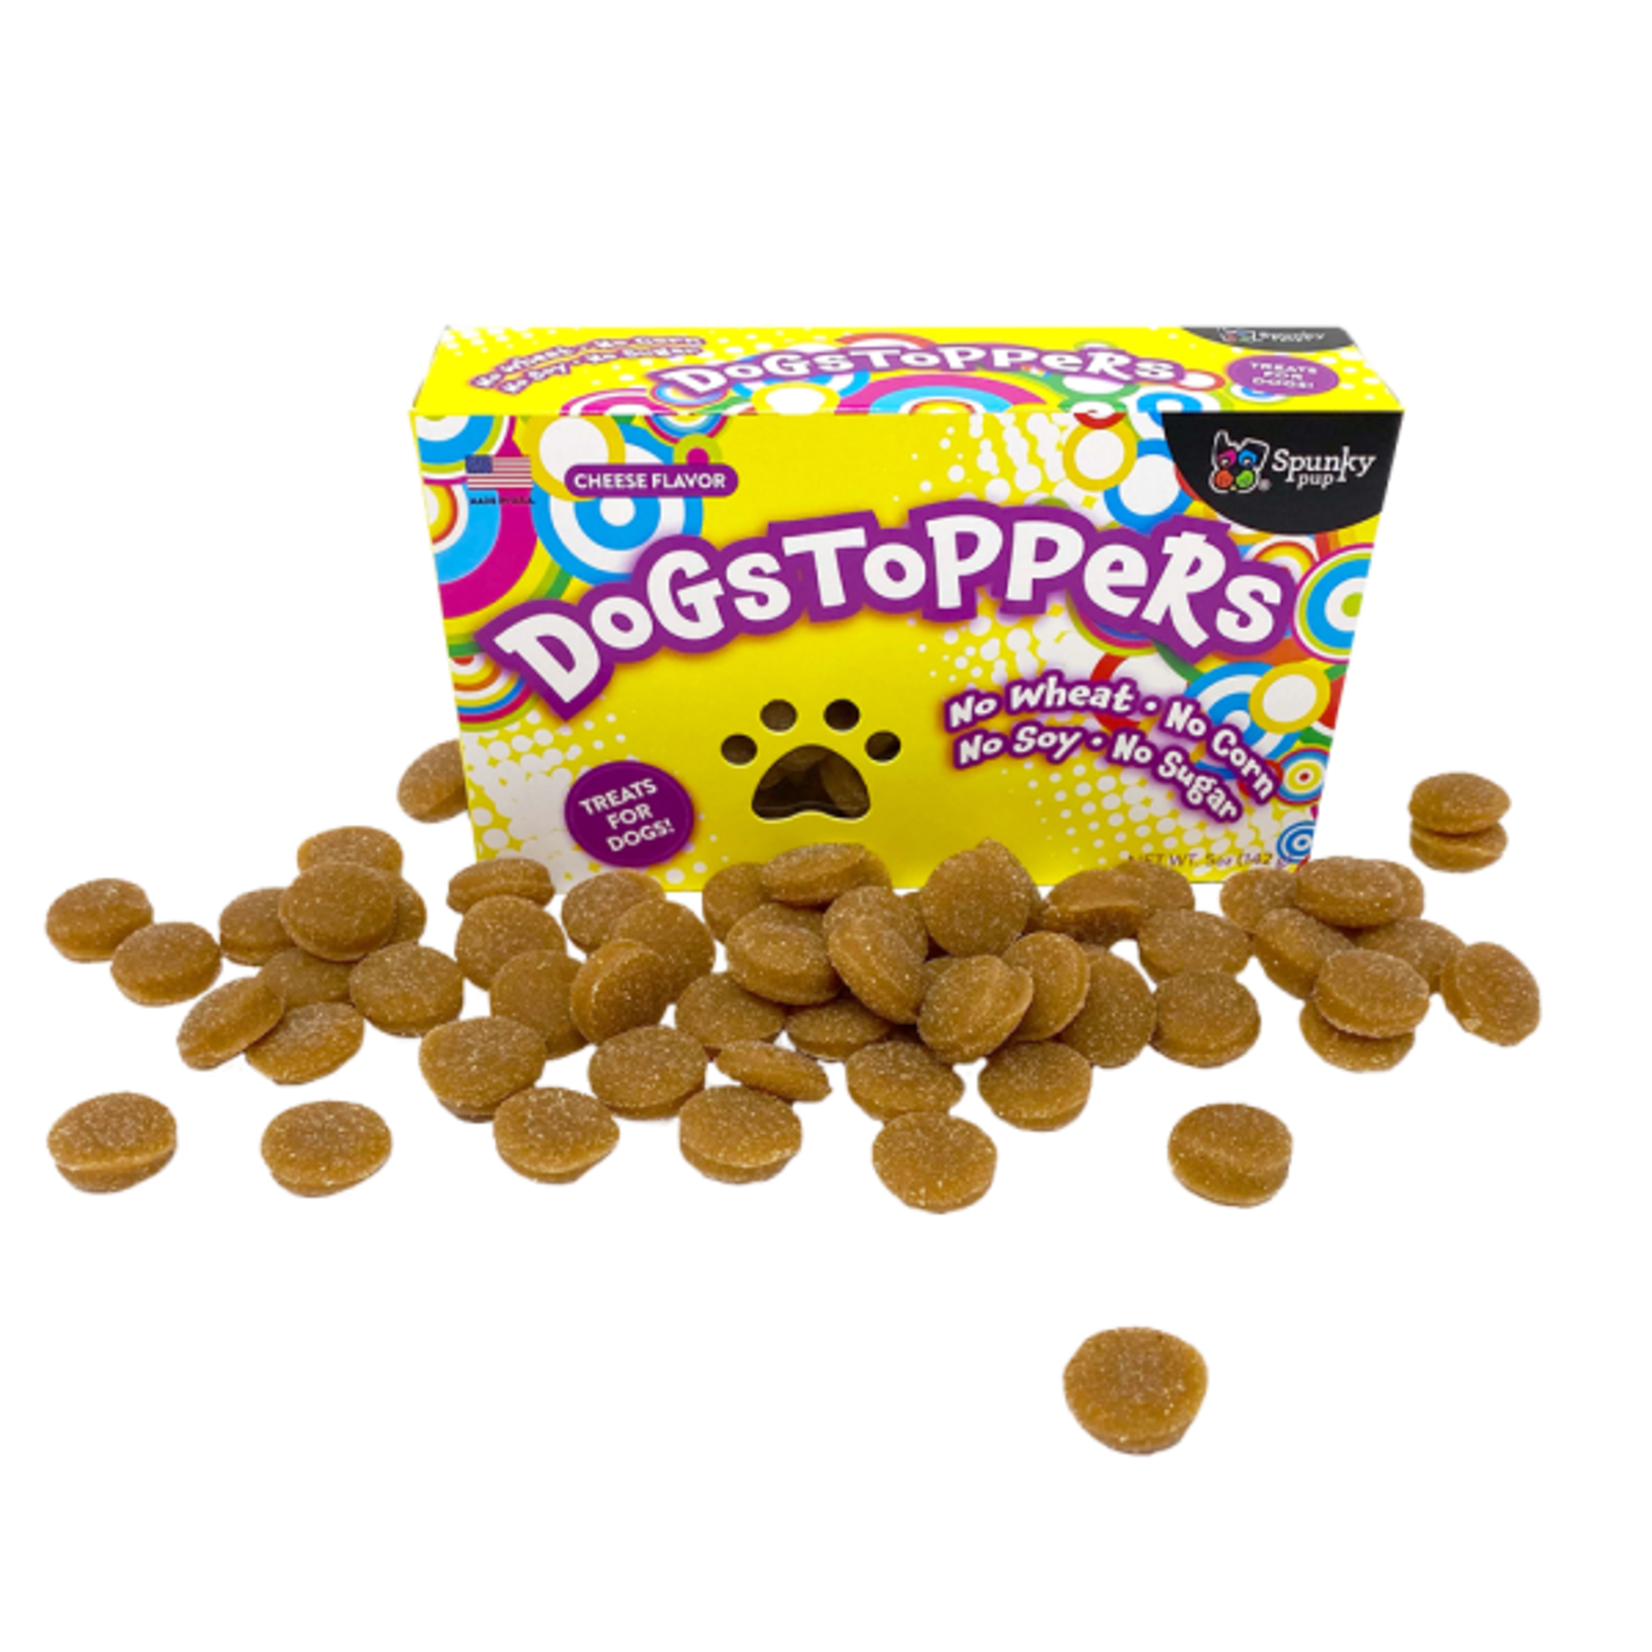 Spunky Pup Spunky Pup Dogstoppers Treats Cheese Flavor 5 oz